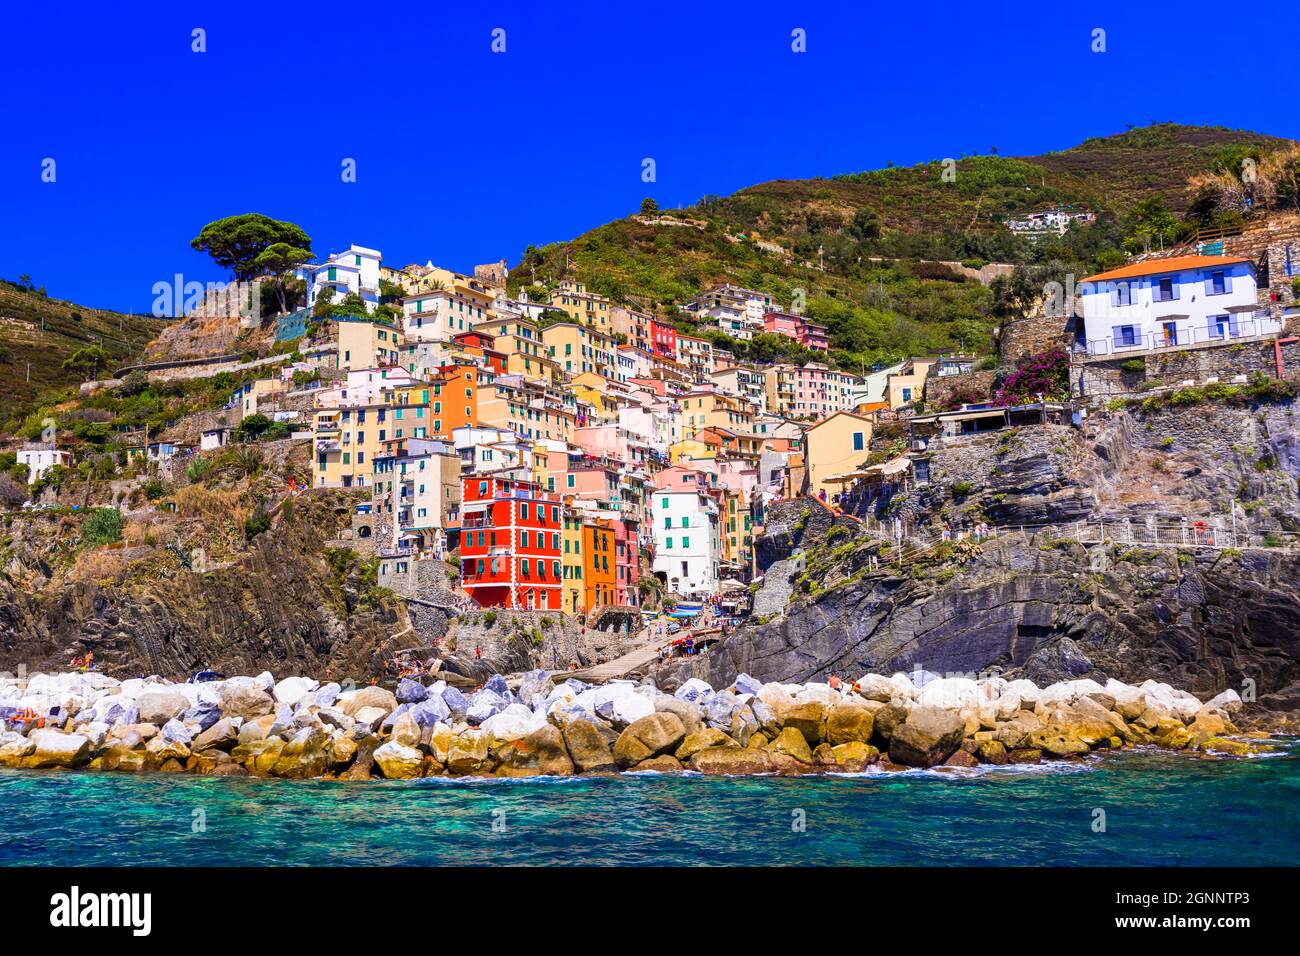 Colorful fishing village Riomaggiore - National Park 'Cinque terre' in Liguria, Itlay travel and landmarks Stock Photo